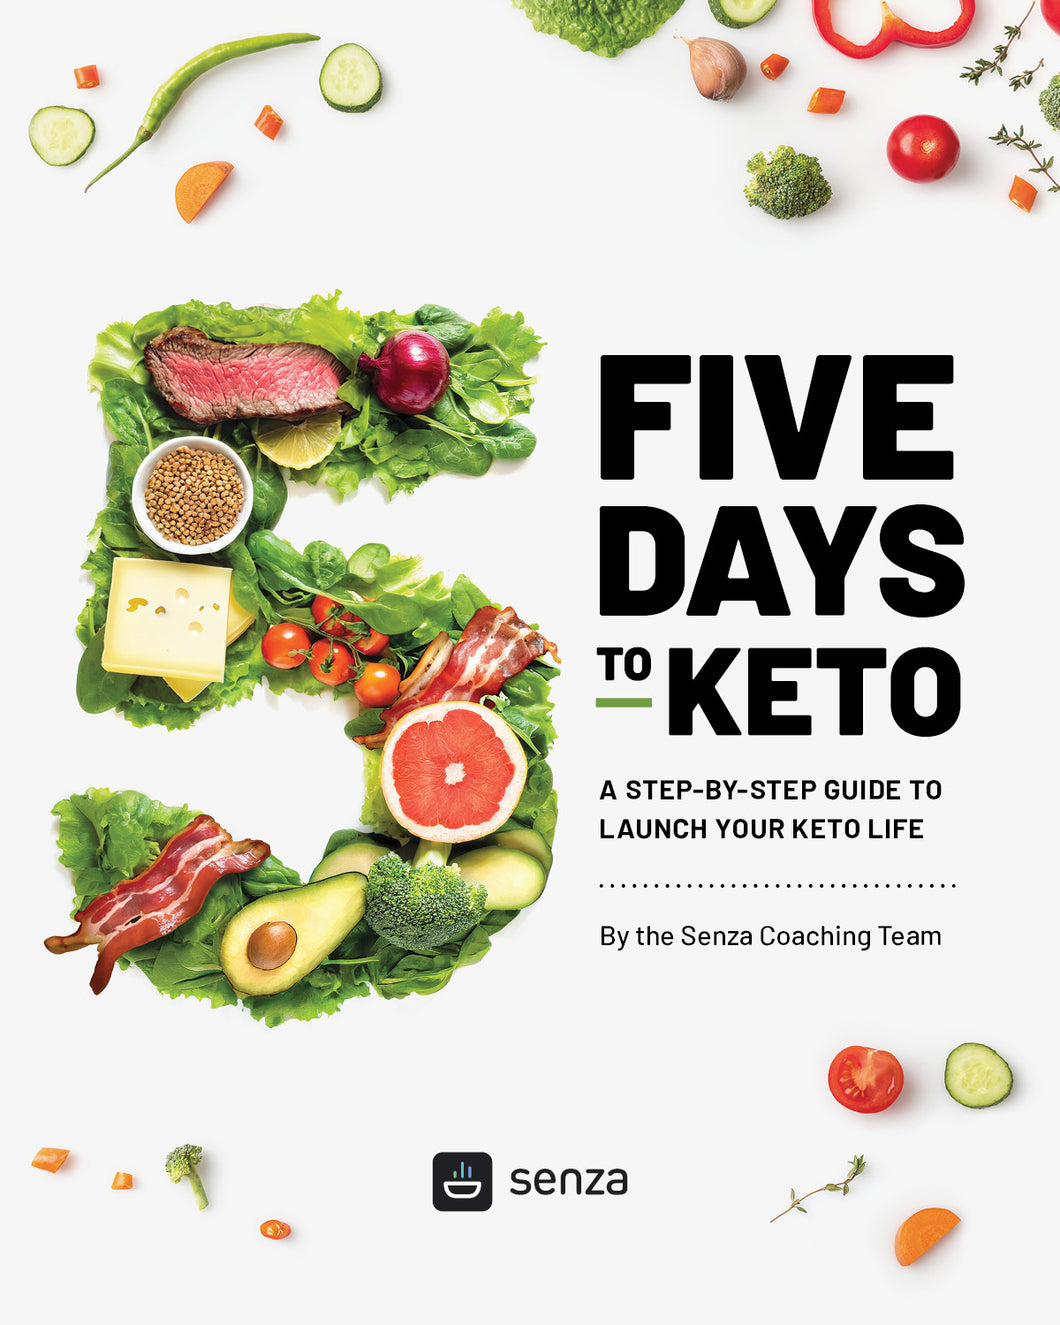 Five Days to Keto Guide